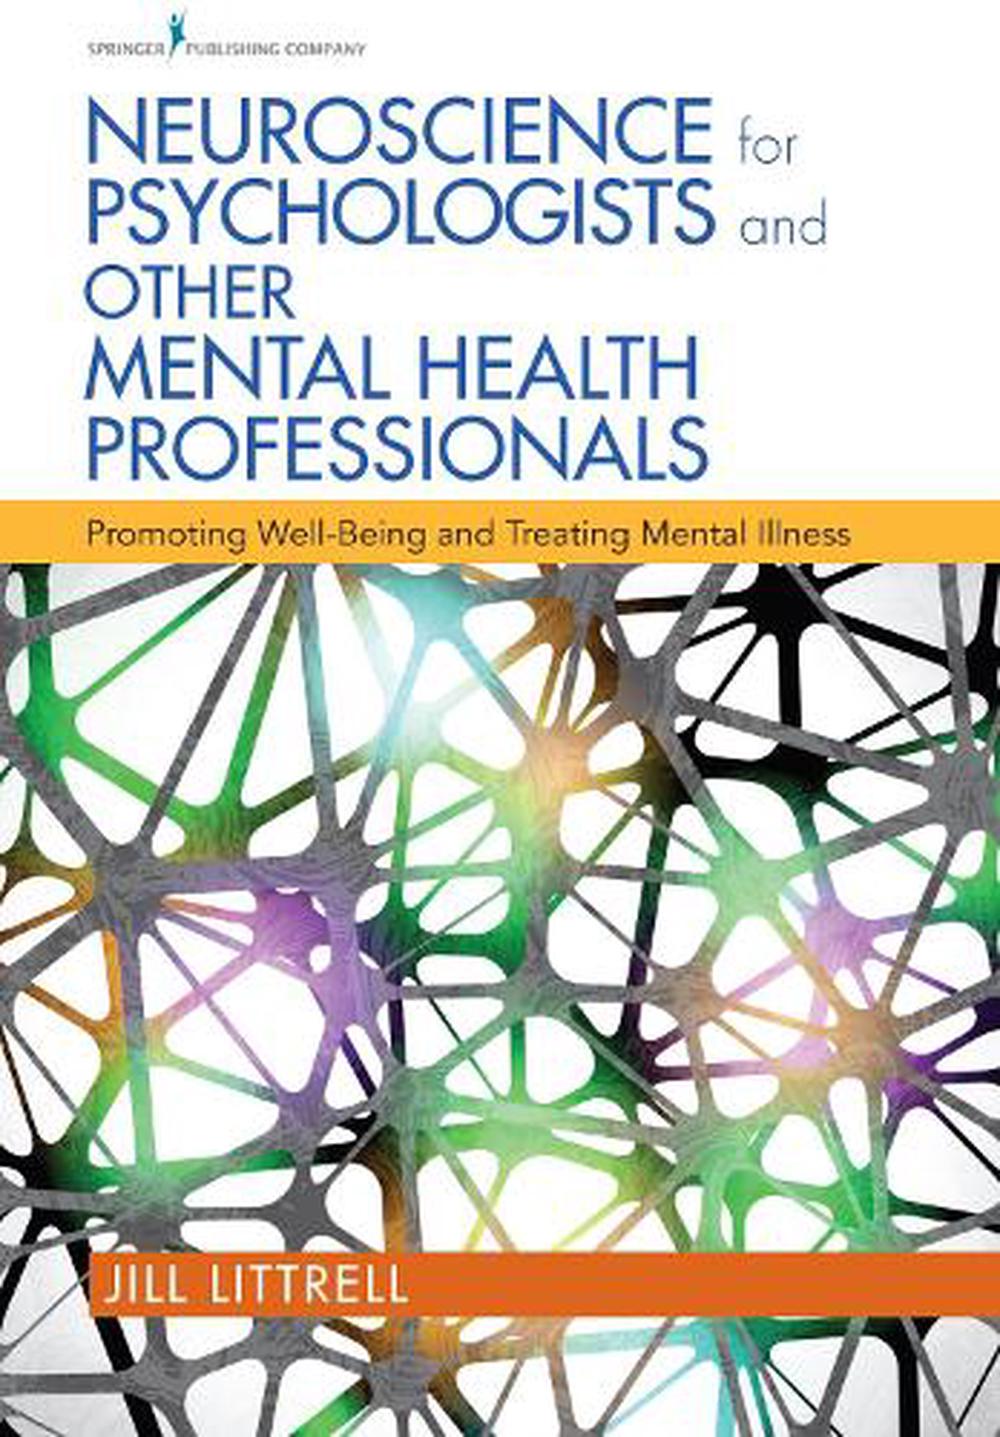 Neuroscience for Psychologists and Other Mental Health Professionals